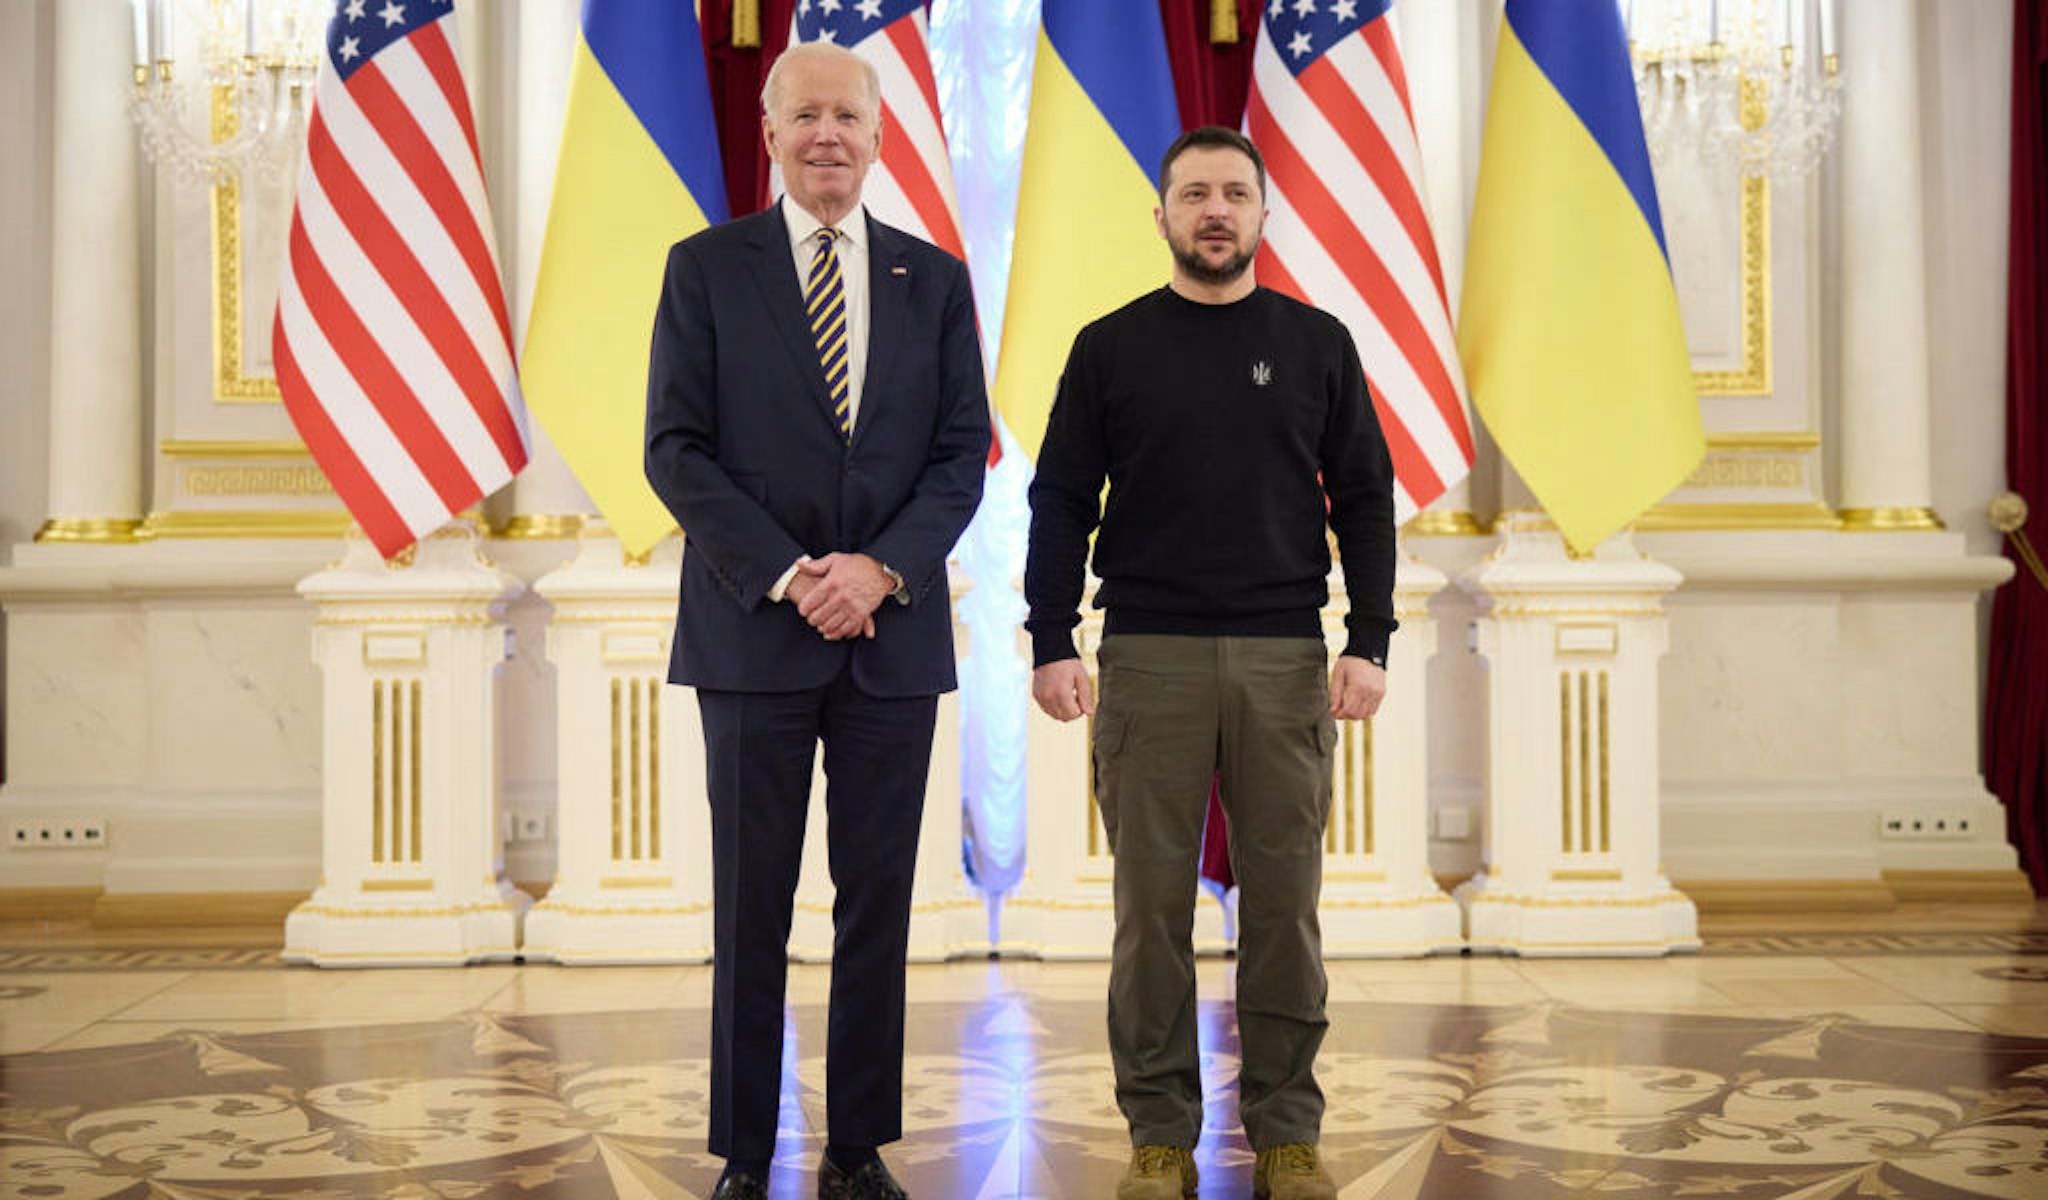 KYIV, UKRAINE - FEBRUARY 20: In this handout photo issued by the Ukrainian Presidential Press Office, U.S. President Joe Biden meets with Ukrainian President Volodymyr Zelensky at the Ukrainian presidential palace on February 20, 2023 in Kyiv, Ukraine. The US President made his first visit to Kyiv since Russia's large-scale invasion last February 24. (Photo by Ukrainian Presidential Press Office via Getty Images)